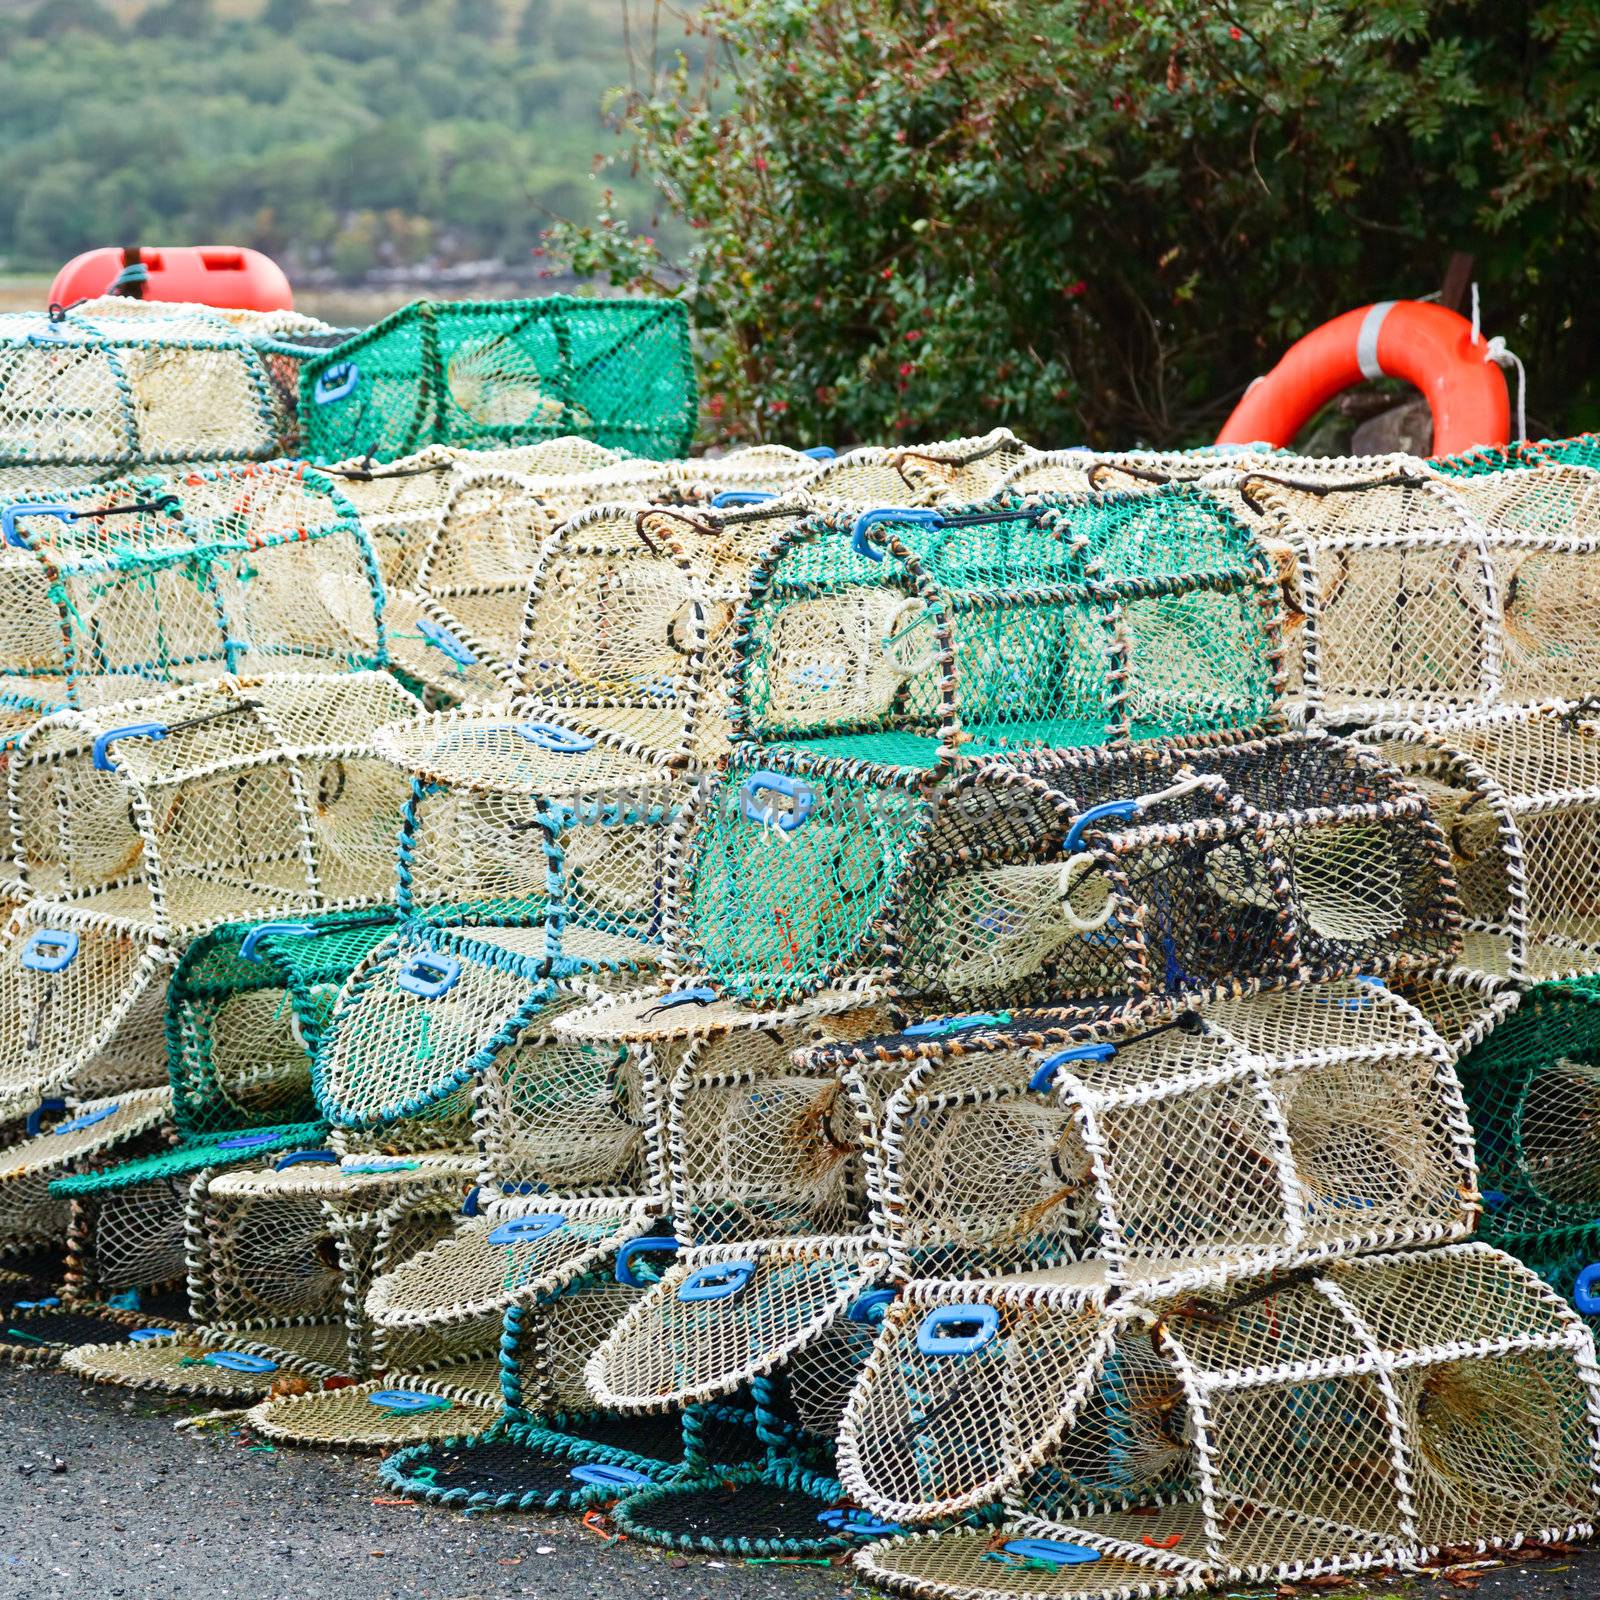 Crab and lobster pots stacked on a pier